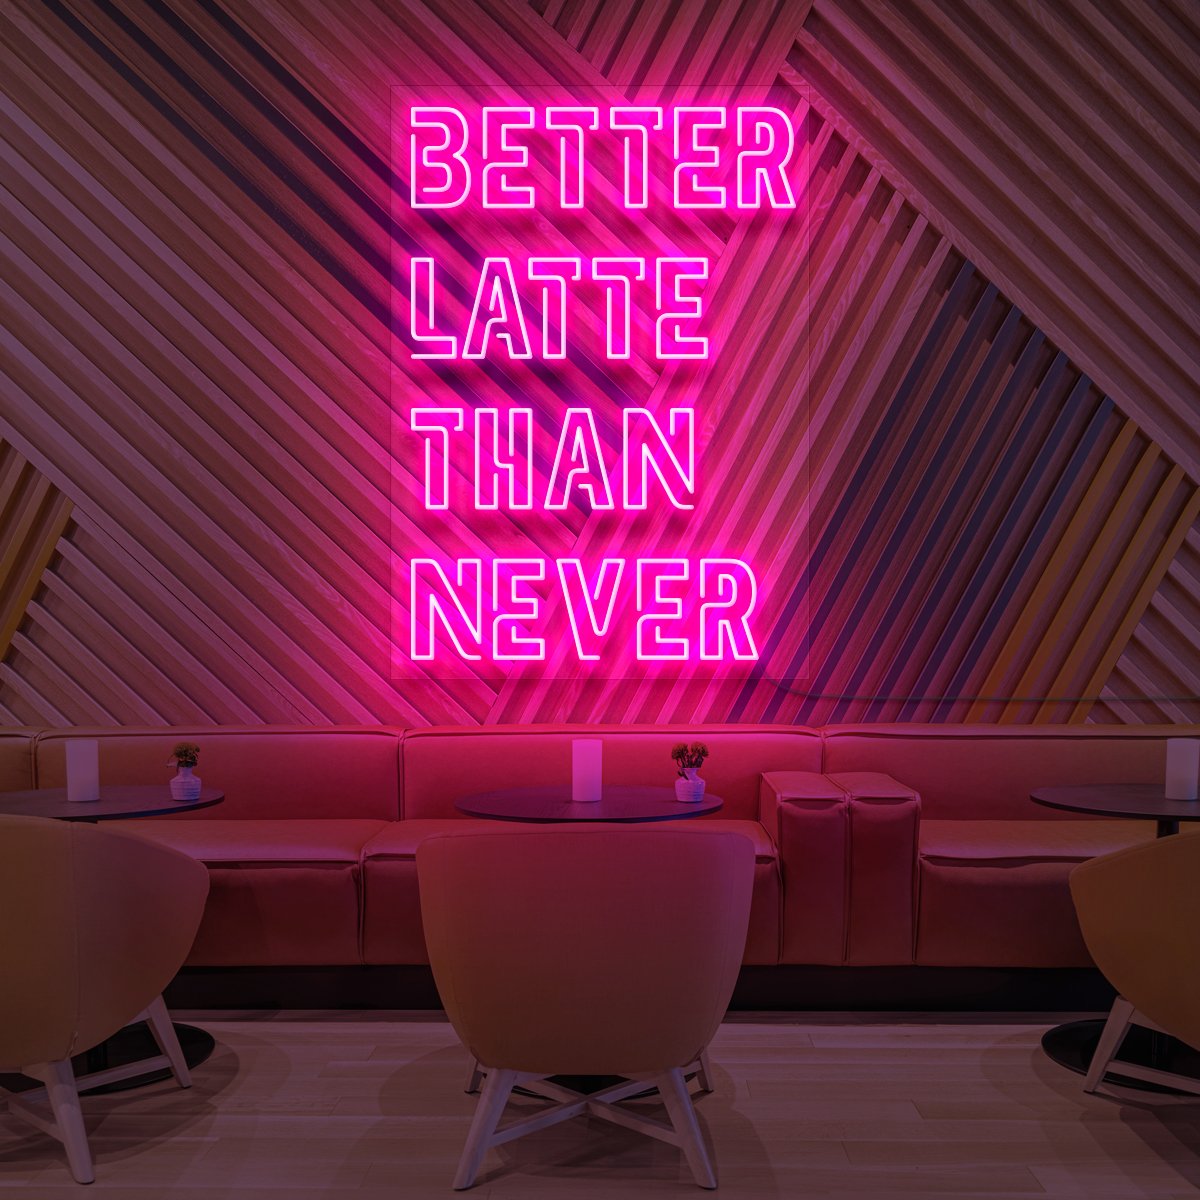 "Better Latte Than Never" Neon Sign for Coffee Shops by Neon Icons